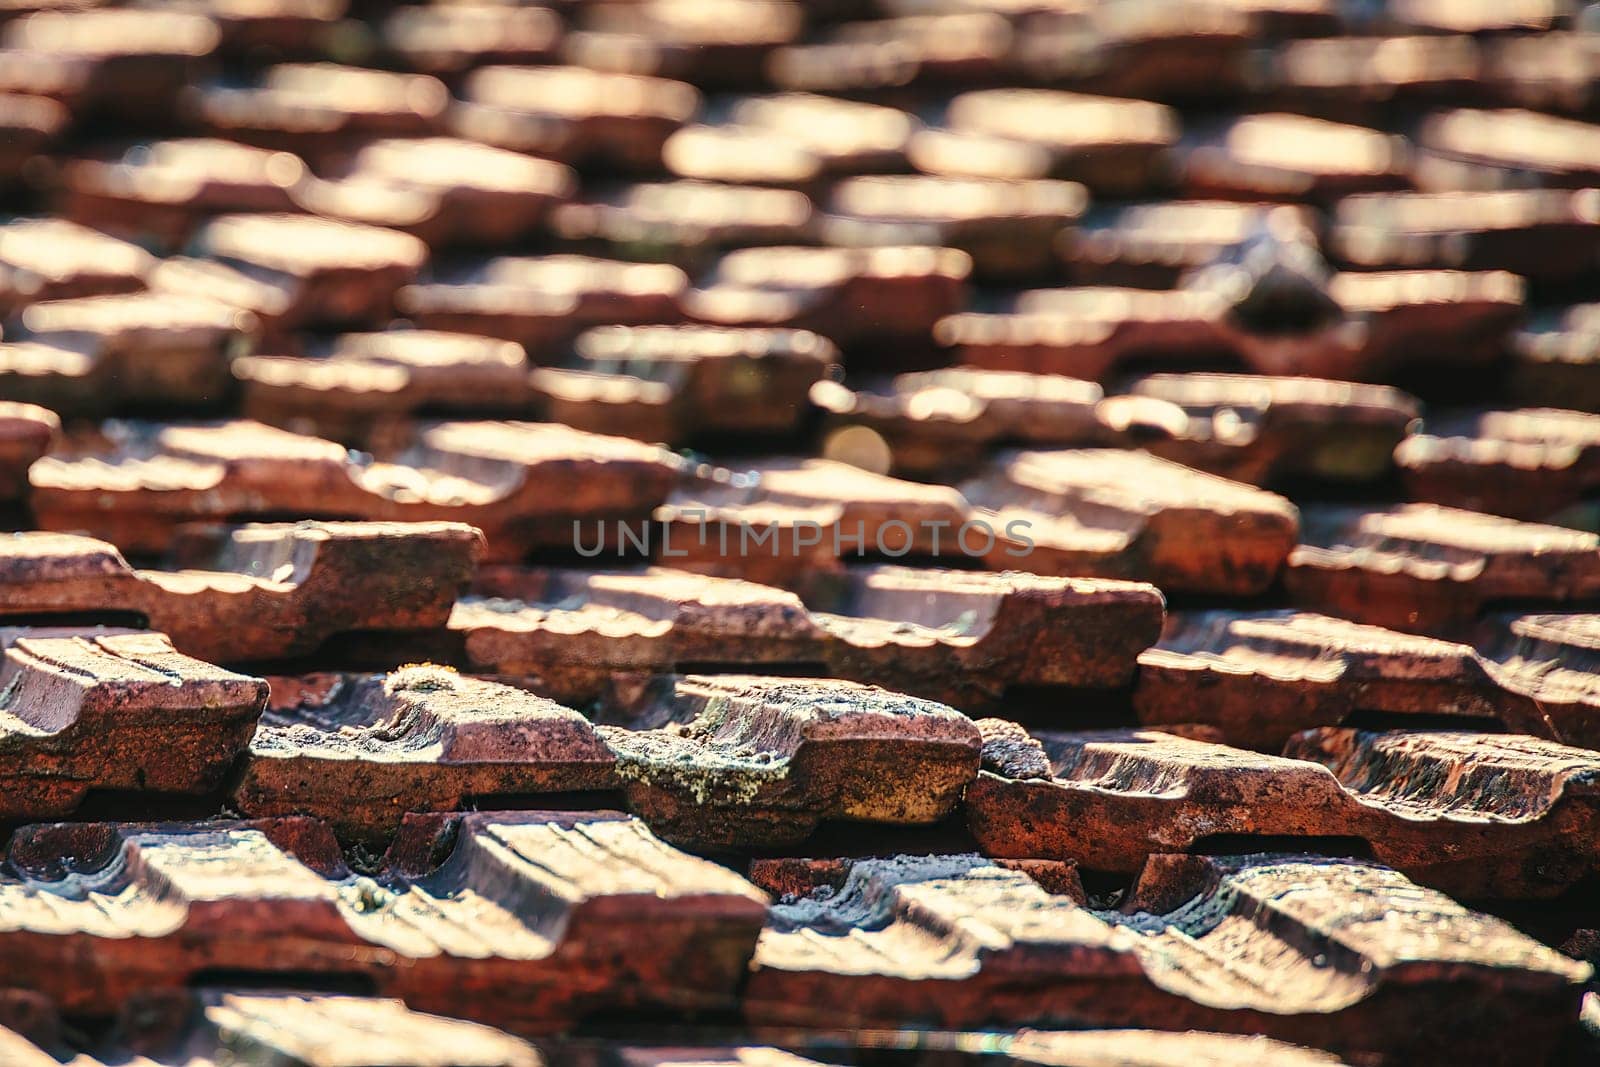 Close up of old roof tiles with visible degradation and vegetation growth. Abstract concept of vintage and time passing.